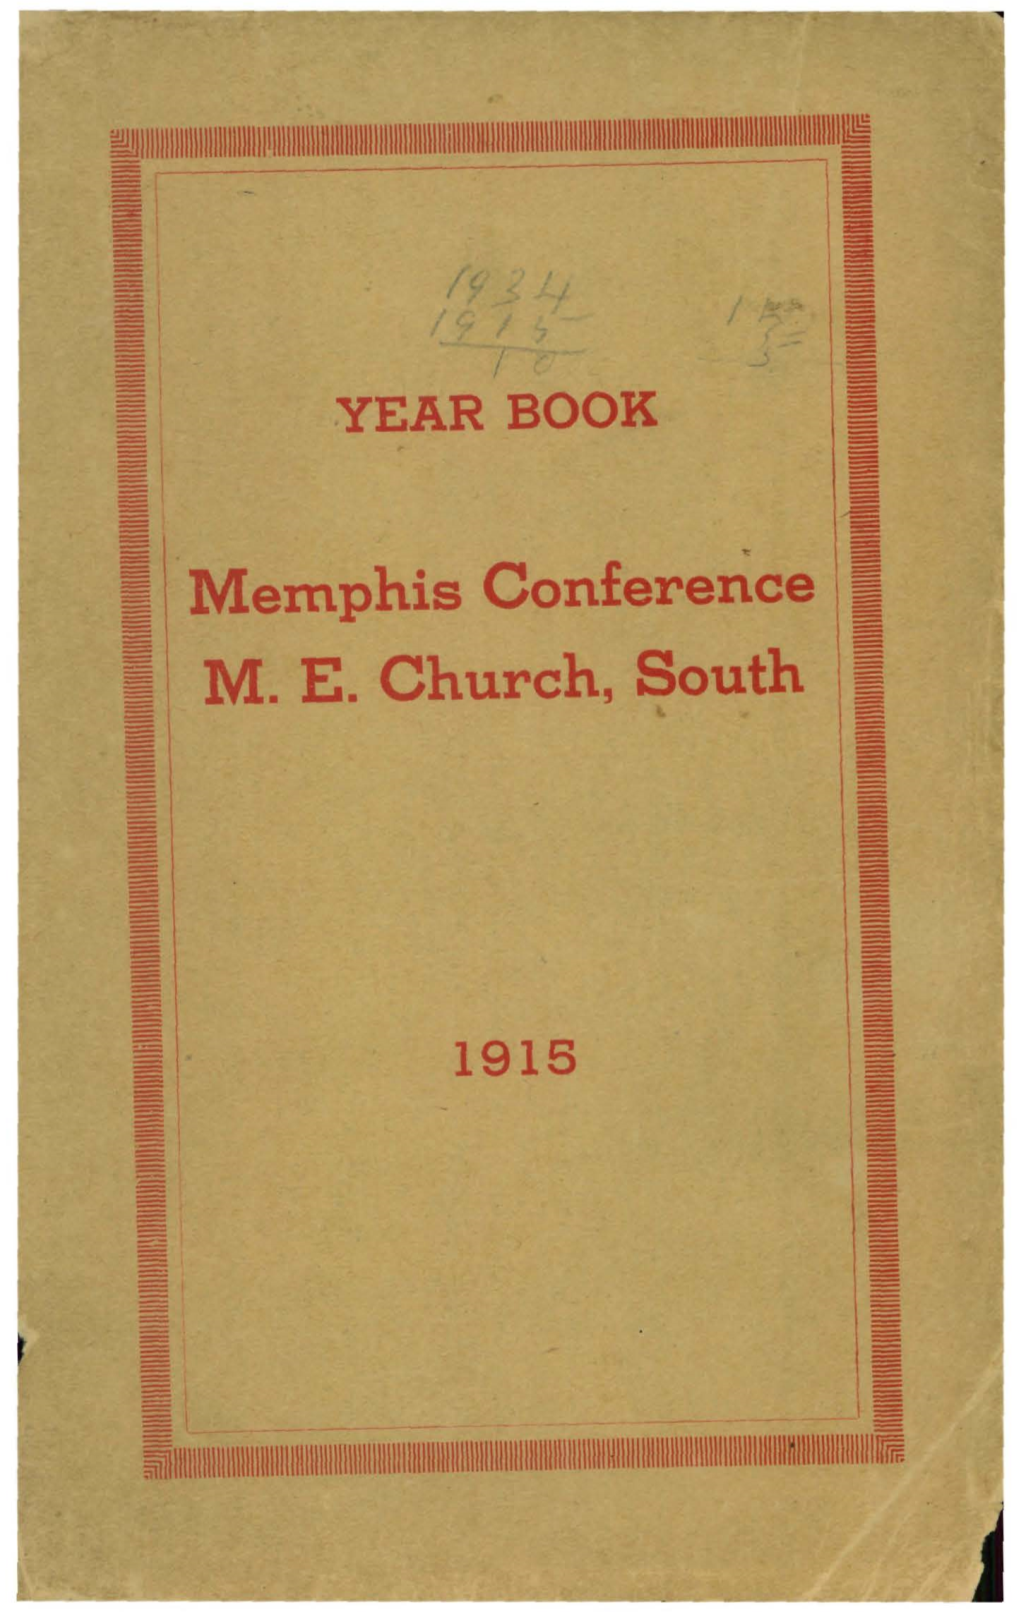 1915 Year Book Memphis Conference